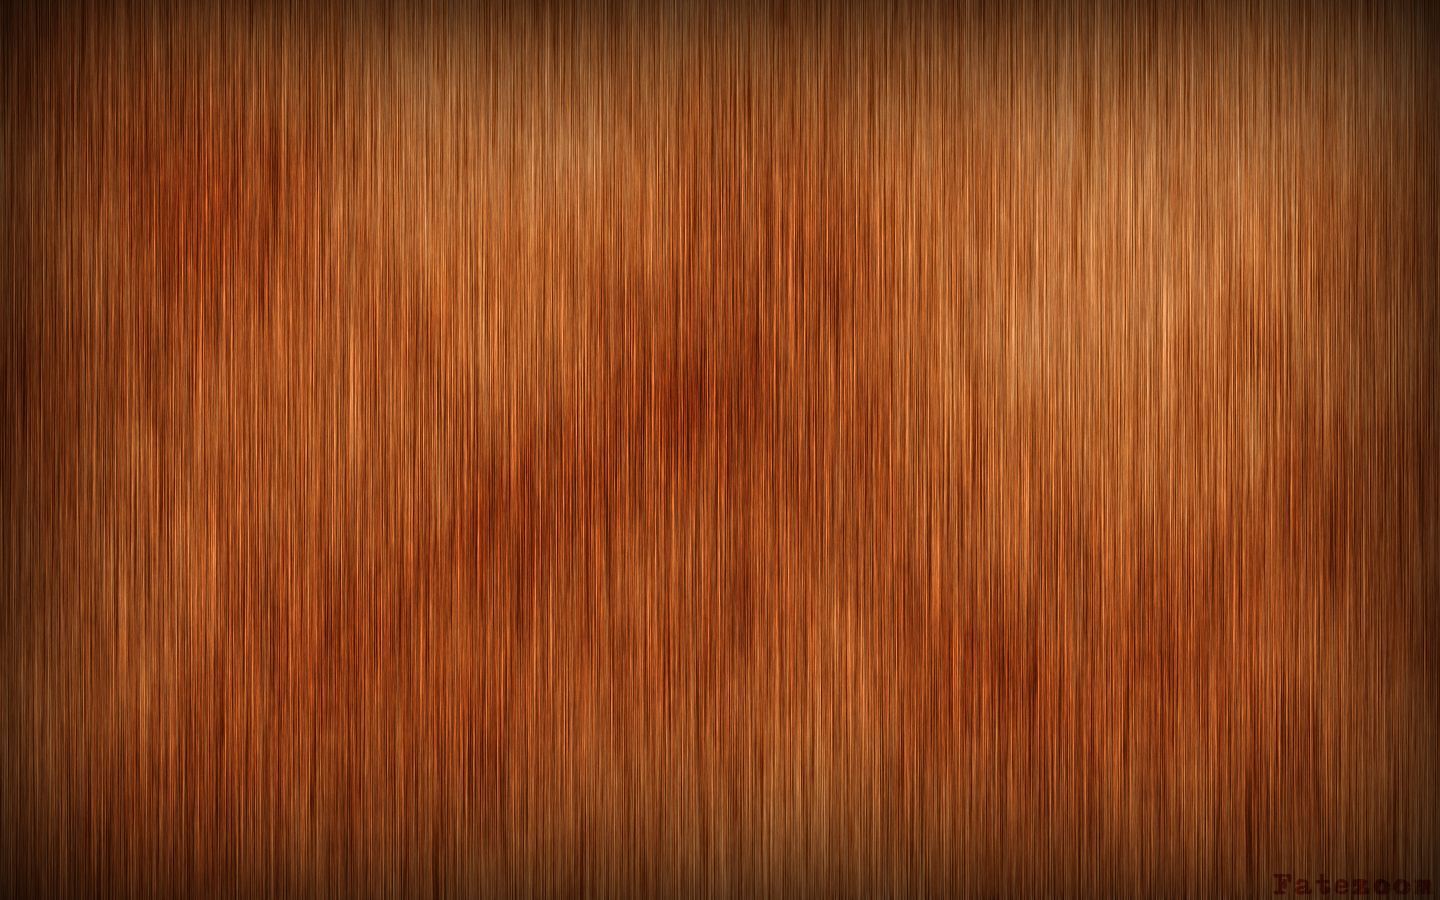 Wallpaper Black Laptop Computer on Brown Wooden Table, Background -  Download Free Image